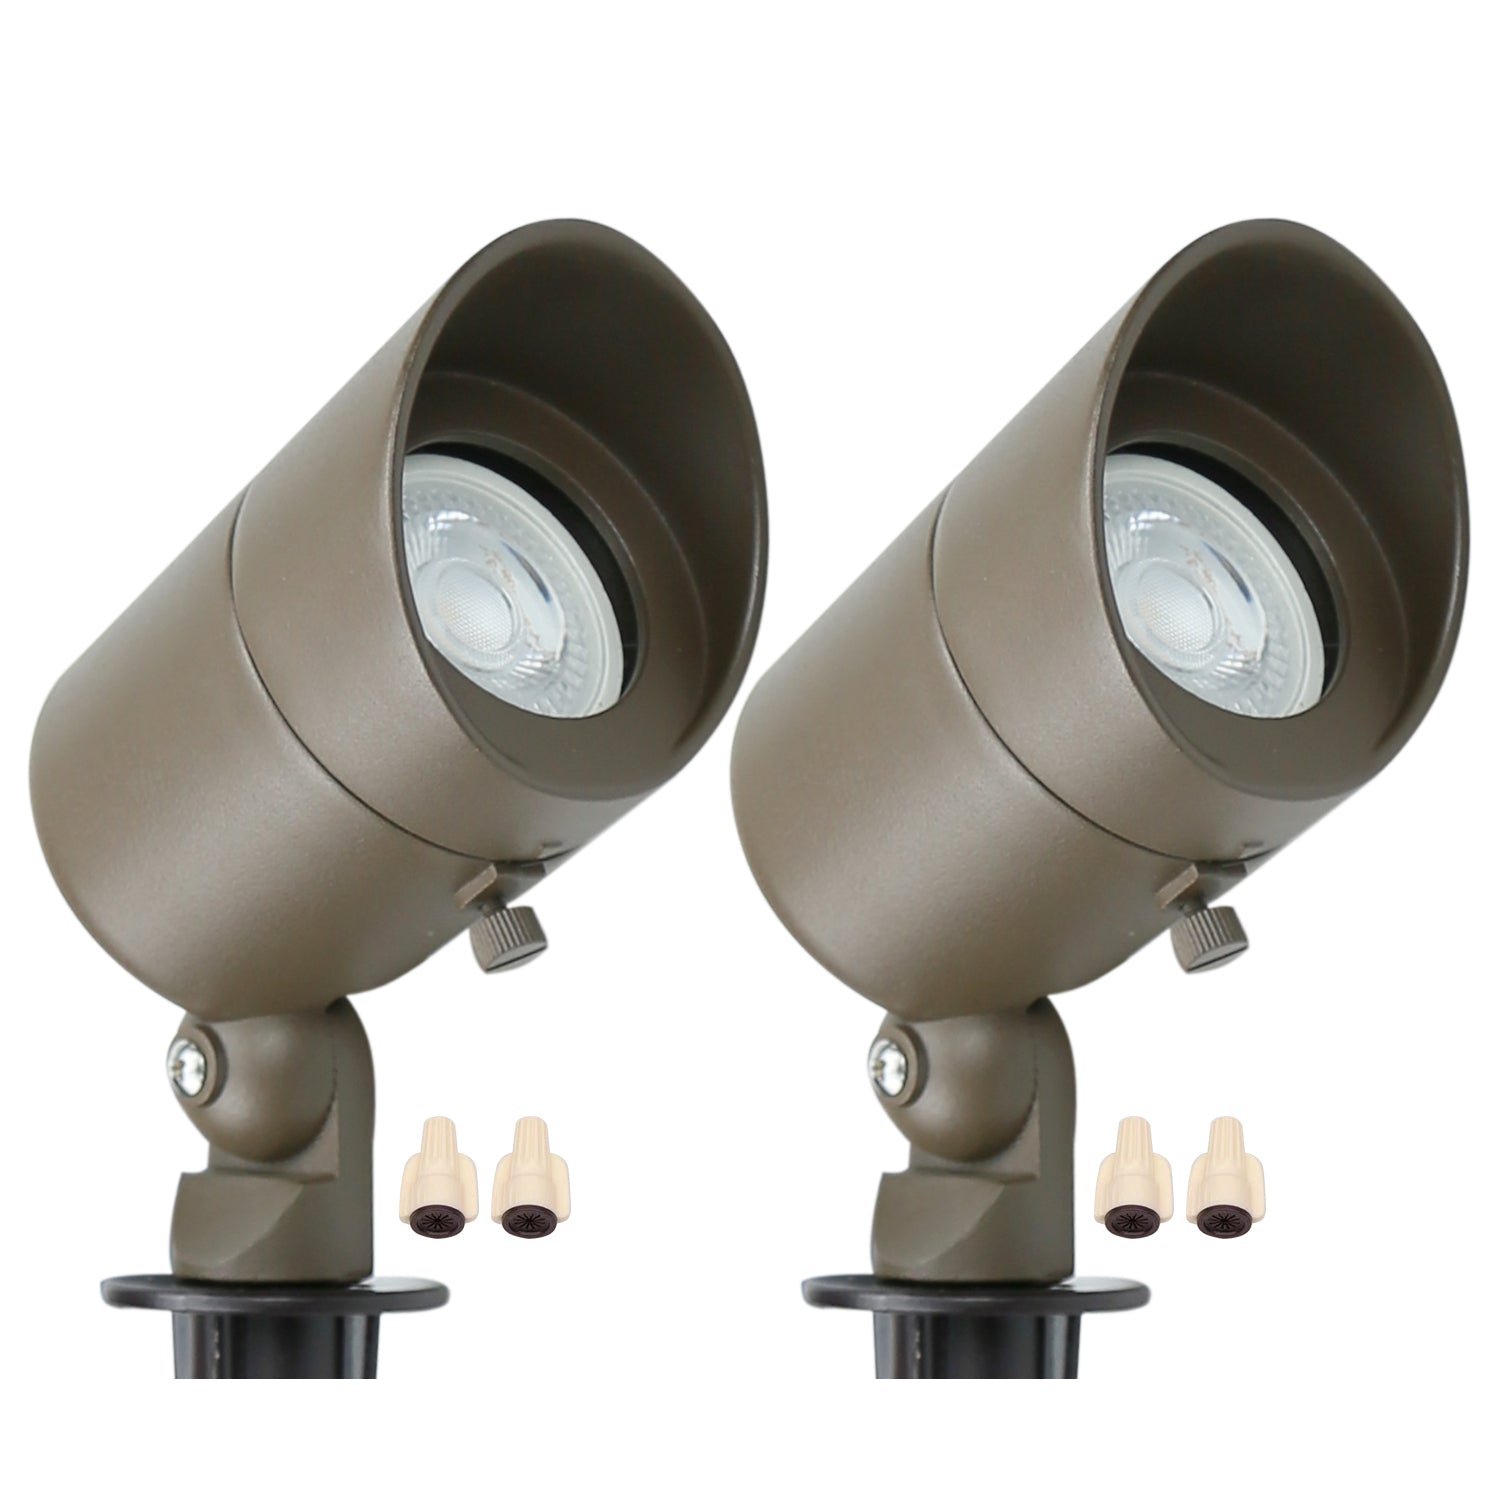 Lumina Lighting® 5W Low Voltage LED Spotlight | 12V Replaceable LED Bulb Included (Bronze, 2-Pack)